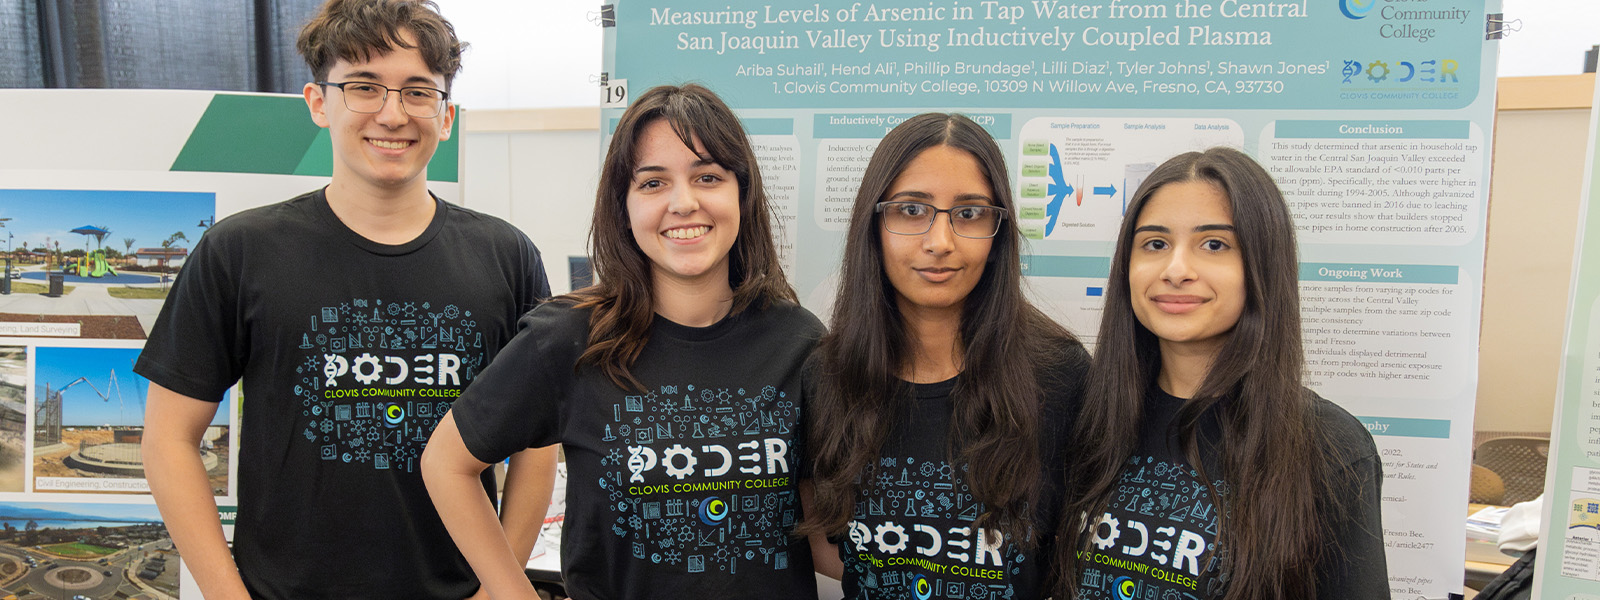 students at the stem symposium